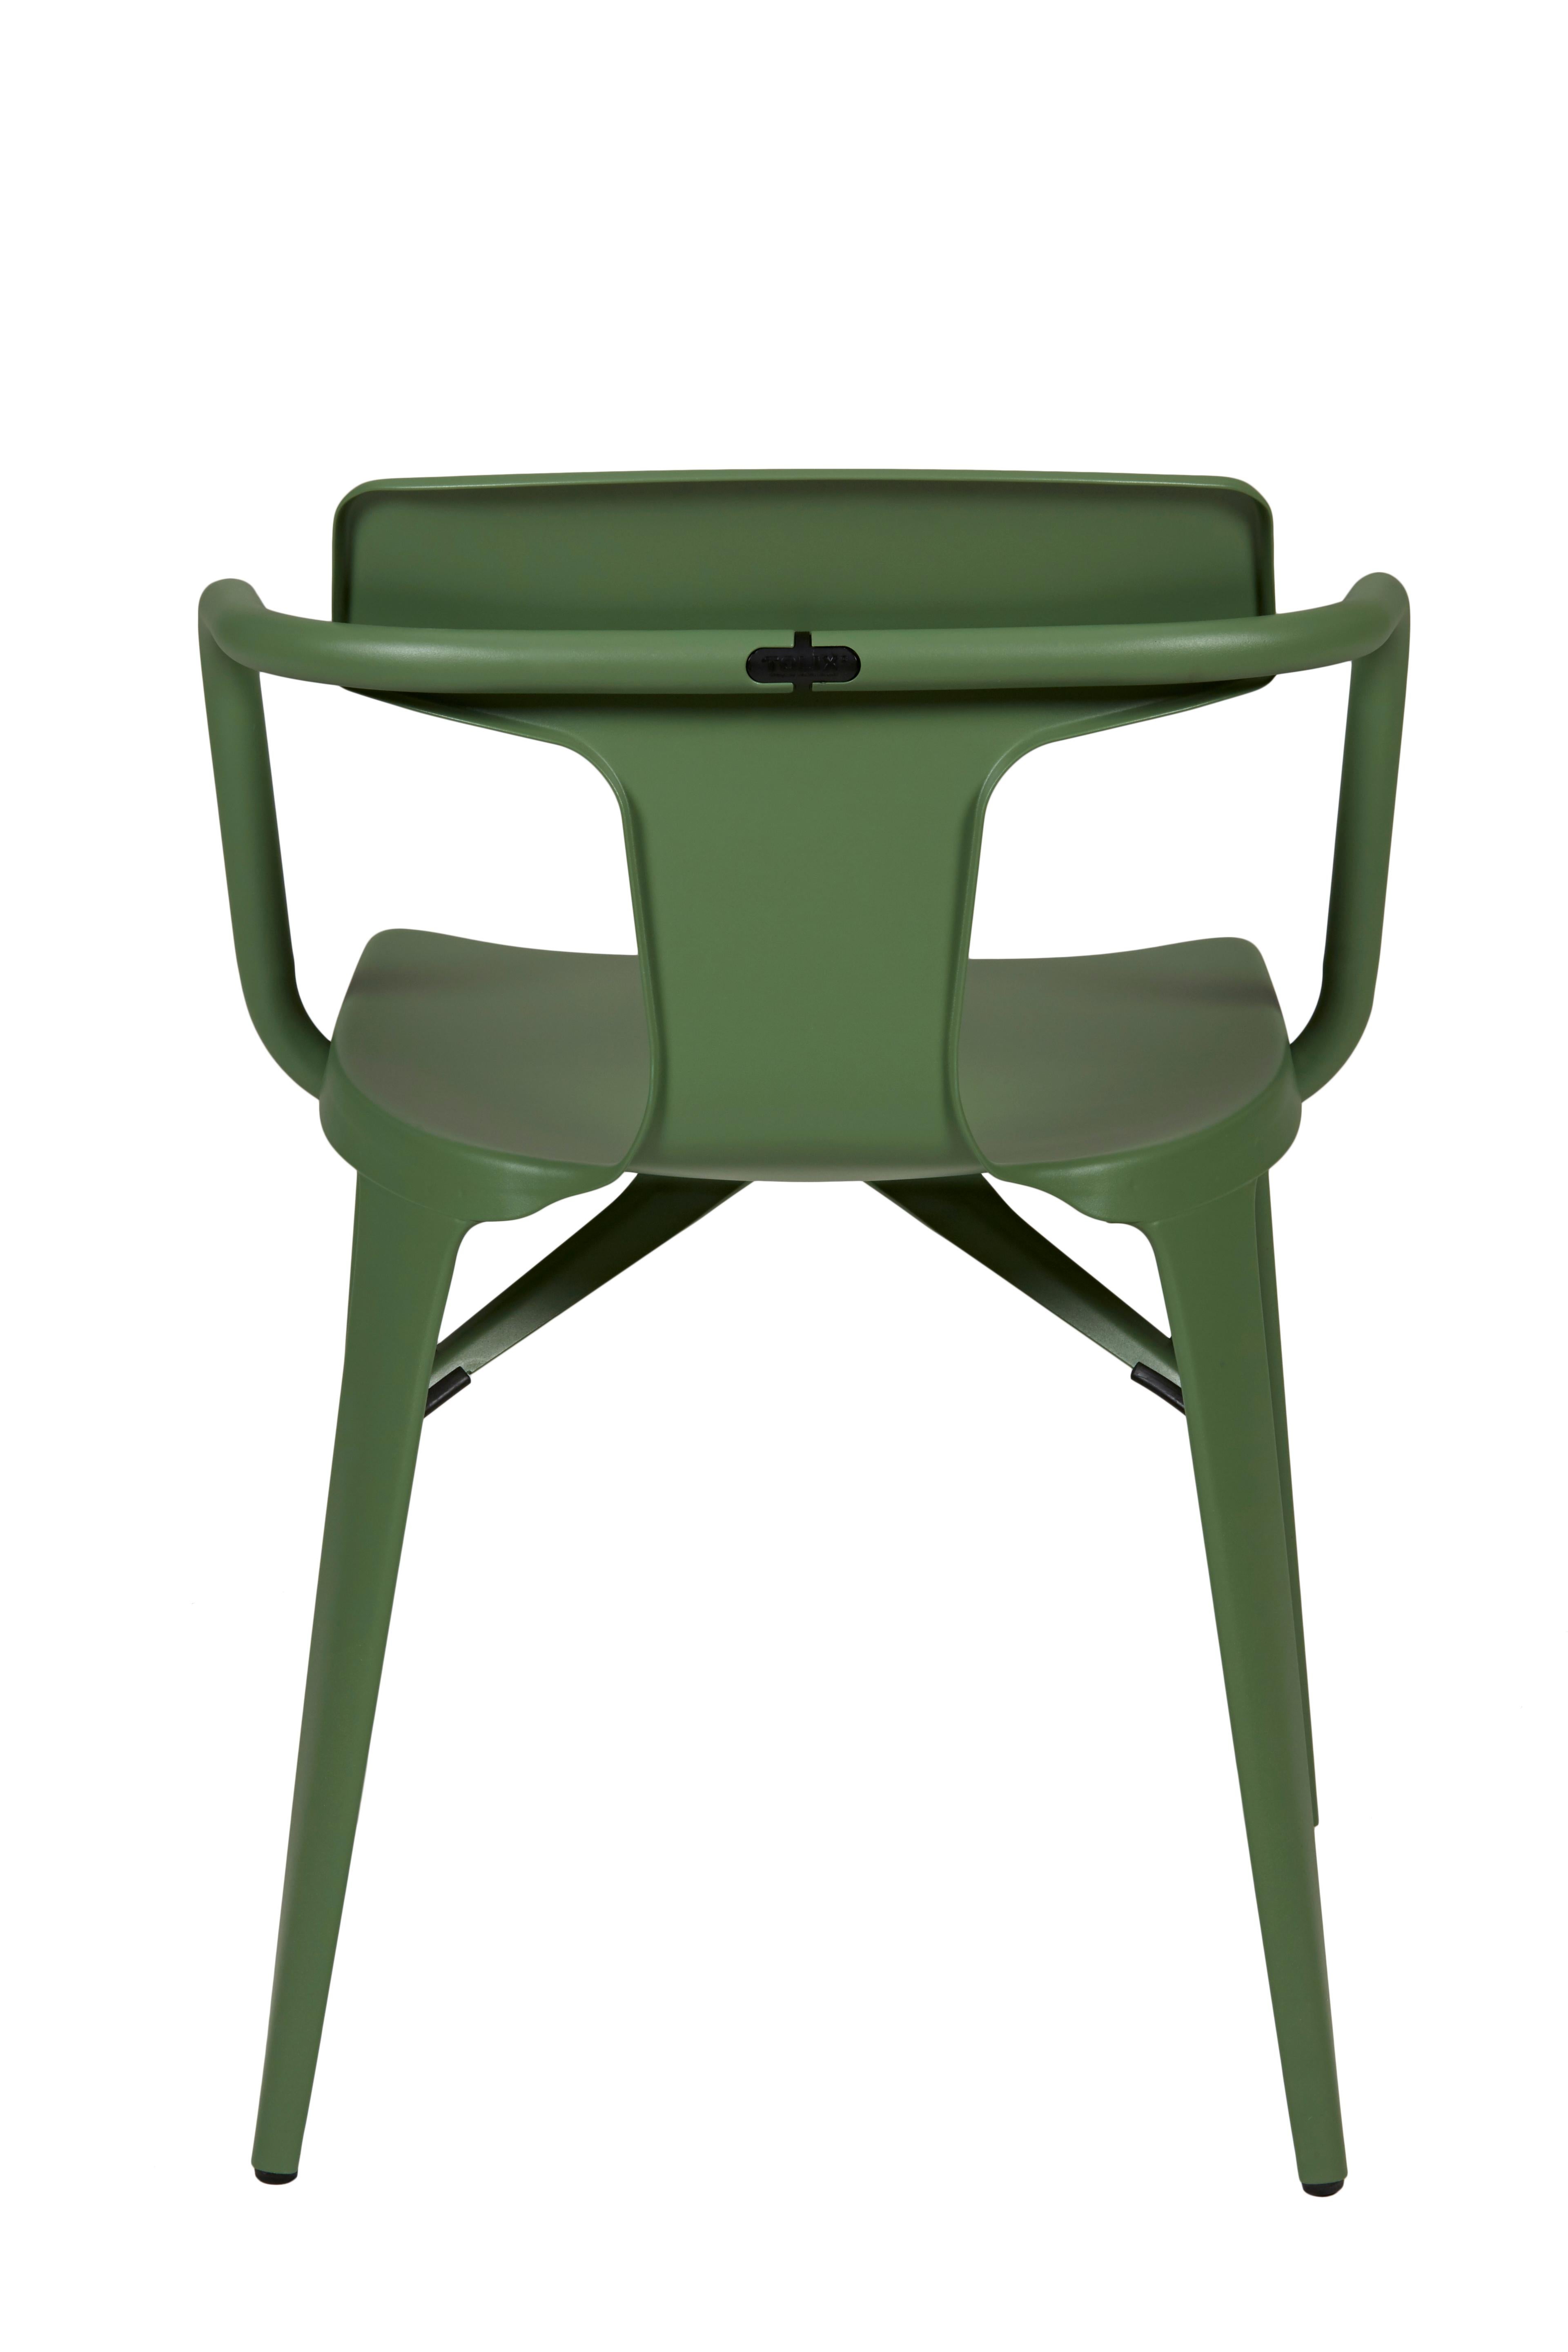 Im Angebot: T14 Chair in Pop Colors by Patrick Norguet and Tolix, Green (Romarin) 2